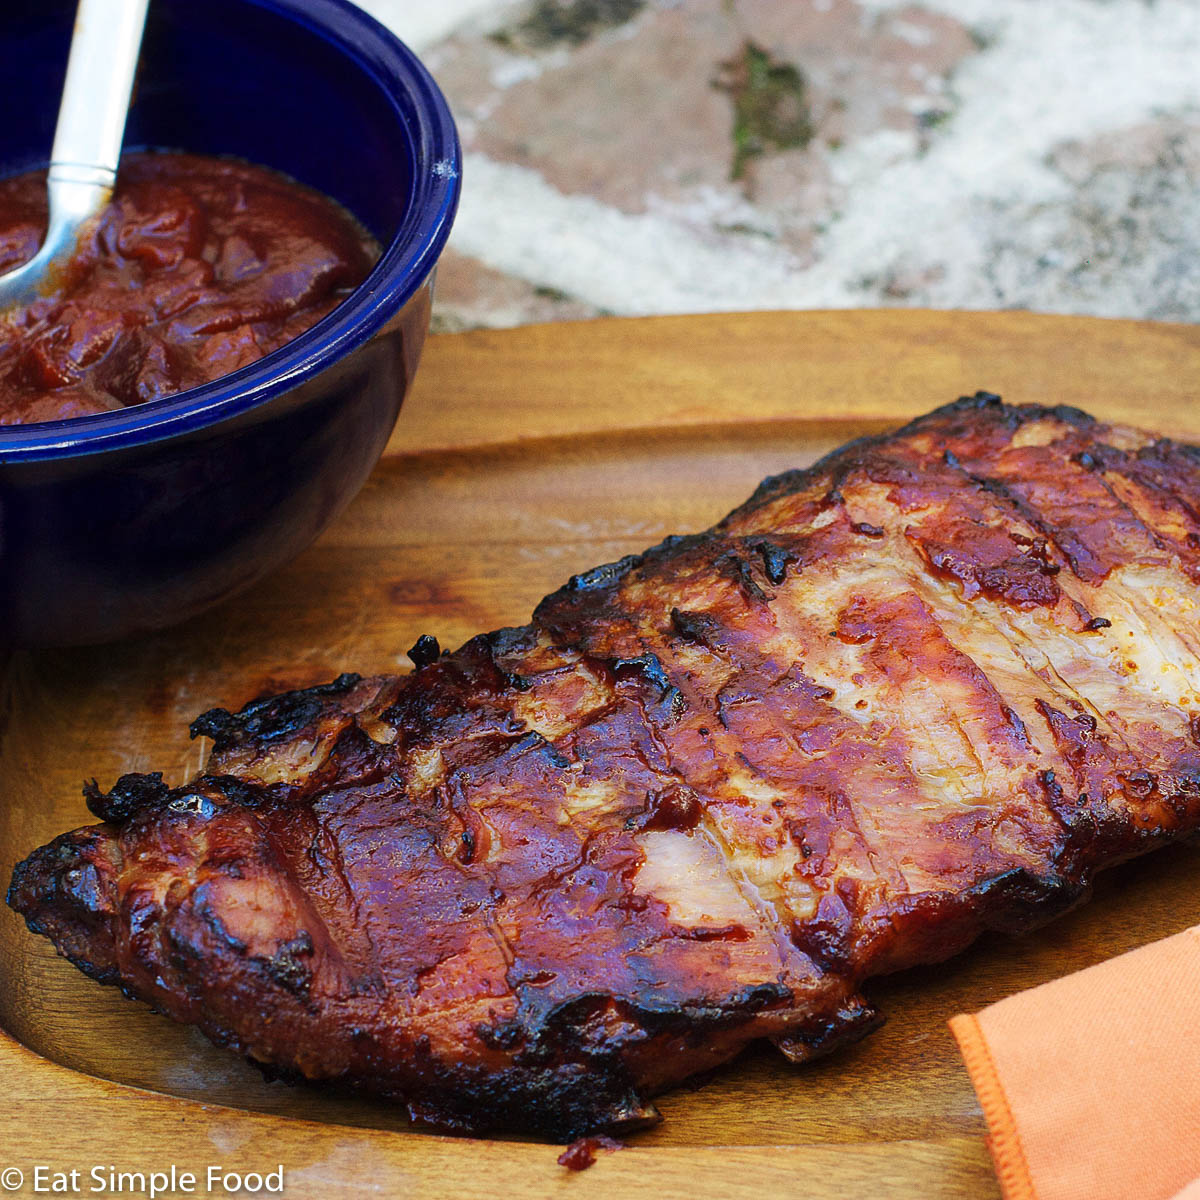 Oven Baked St Louis Style Bbq Ribs Recipe Video Eat Simple Food,Easy Chinese Eggplant Recipes